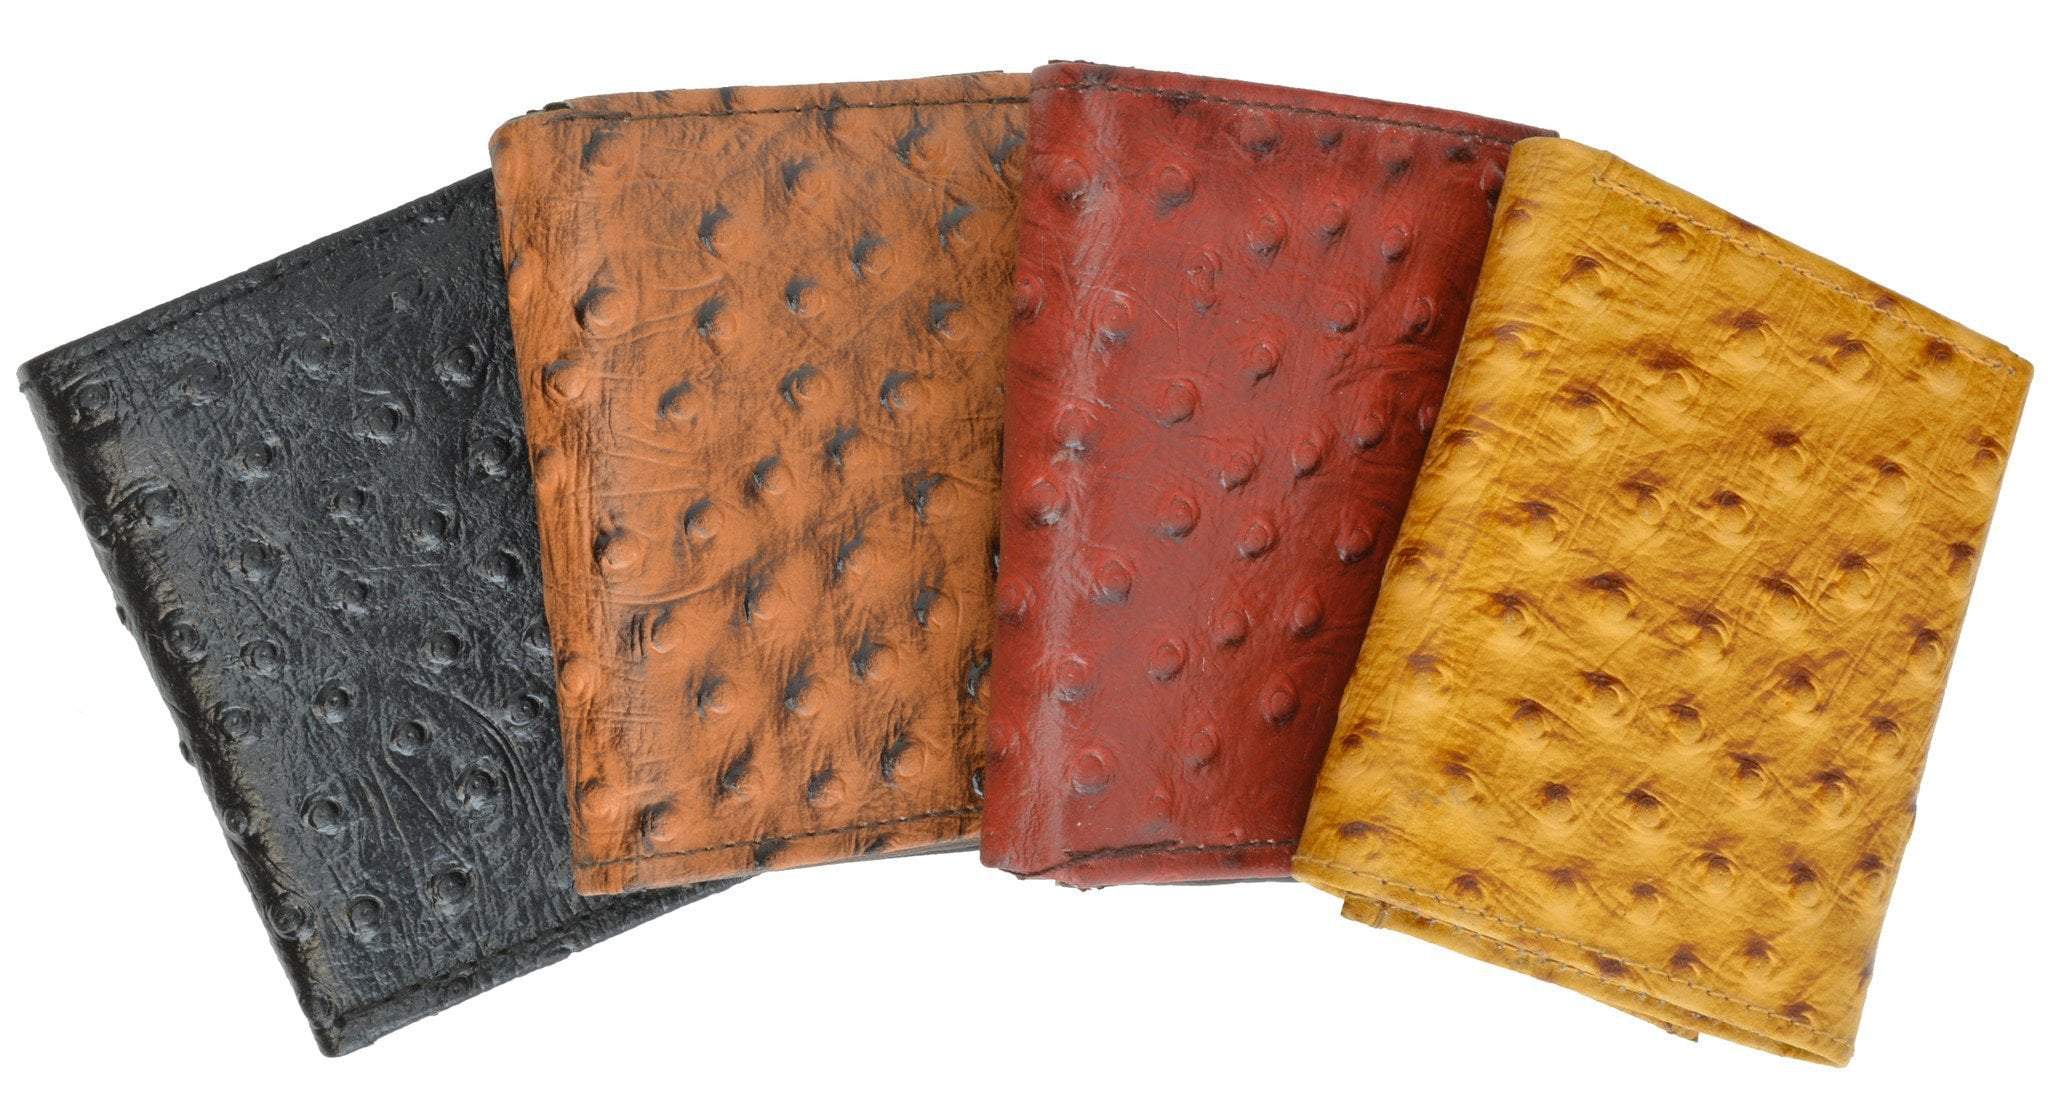 Genuine Ostrich Skin Leather Men's Bifold Wallets Made In USA